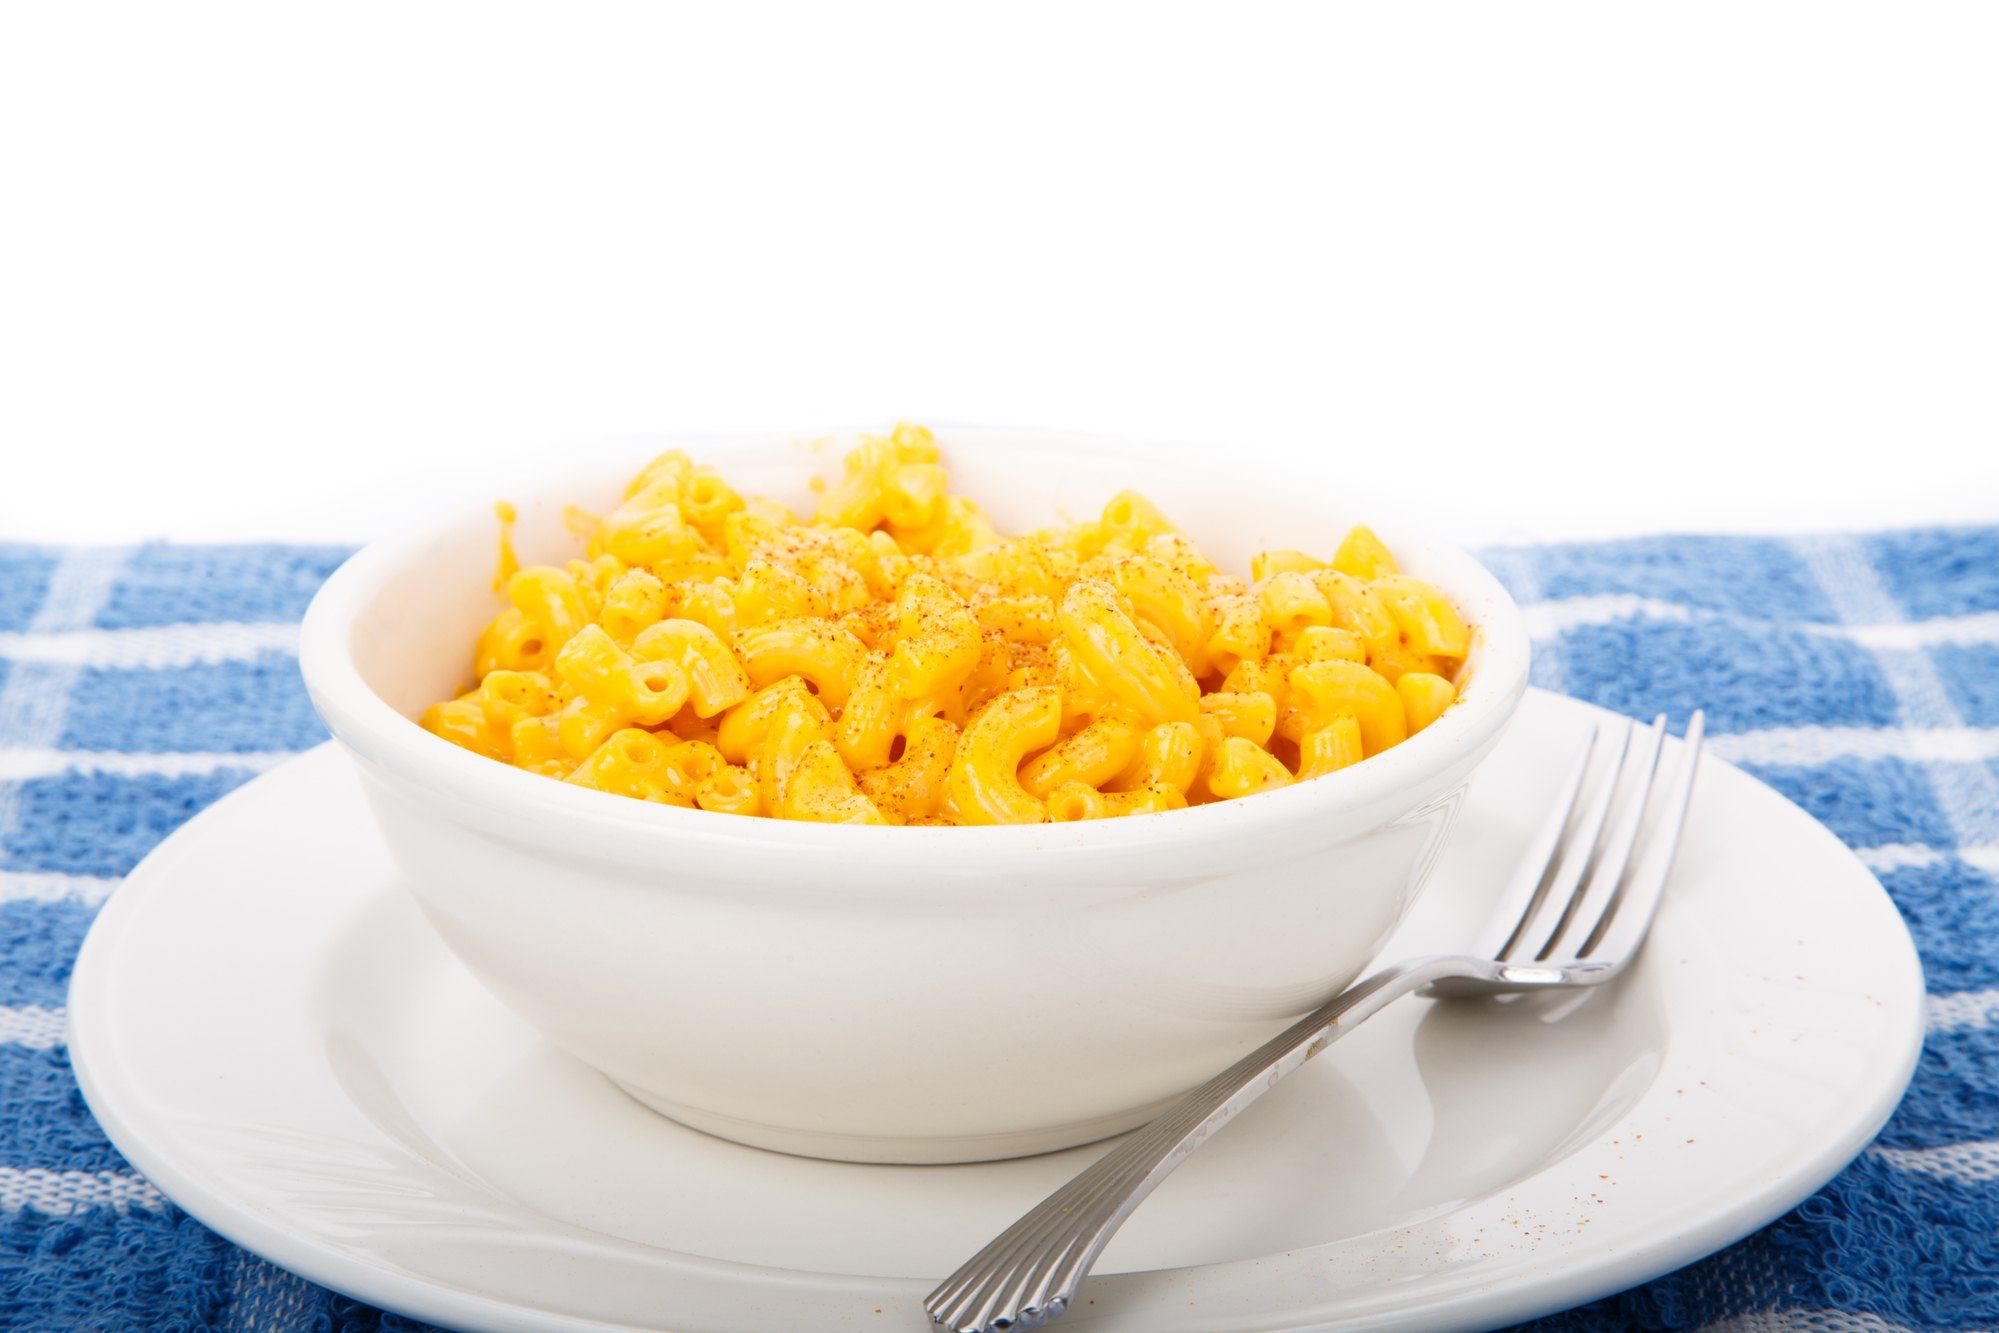 Annie's mac and cheese contains chemicals, a class action lawsuit claims.